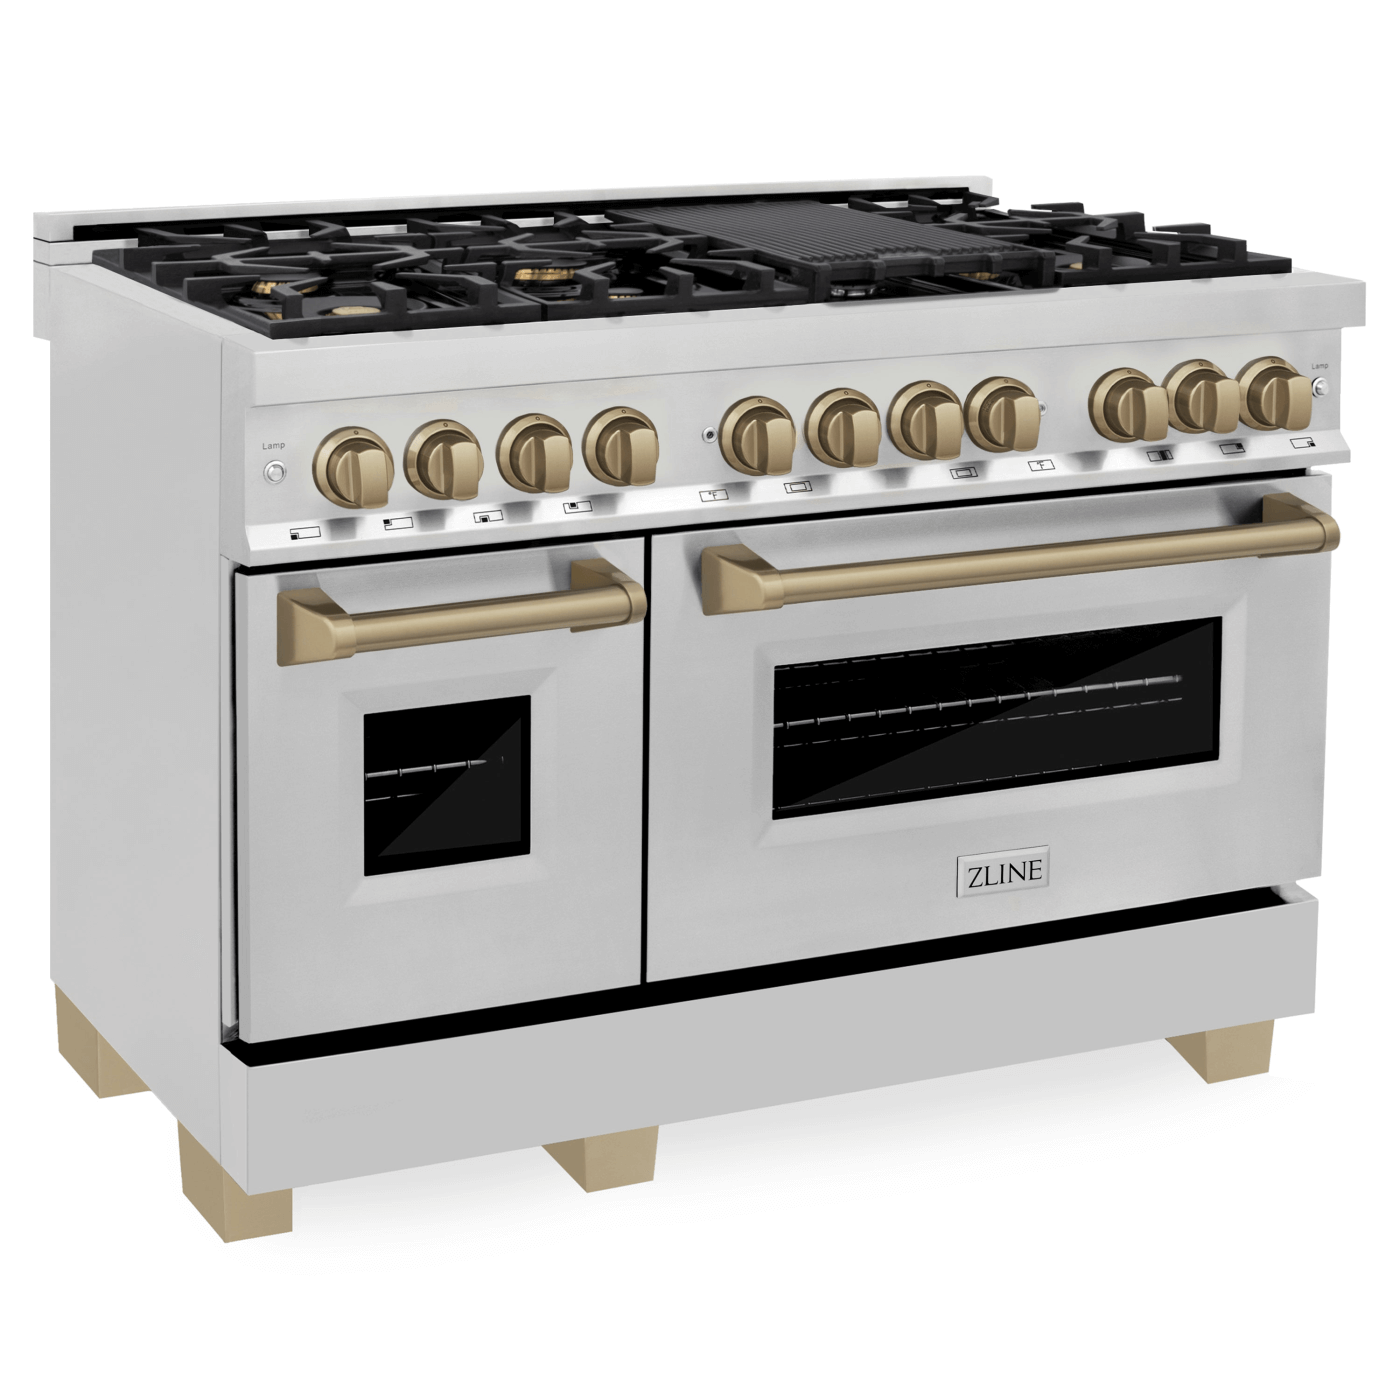 ZLINE Autograph Edition 48 in. 6.0 cu. ft. Dual Fuel Range with Gas Stove and Electric Oven in Stainless Steel with Champagne Bronze Accents (RAZ-48-CB) - white background